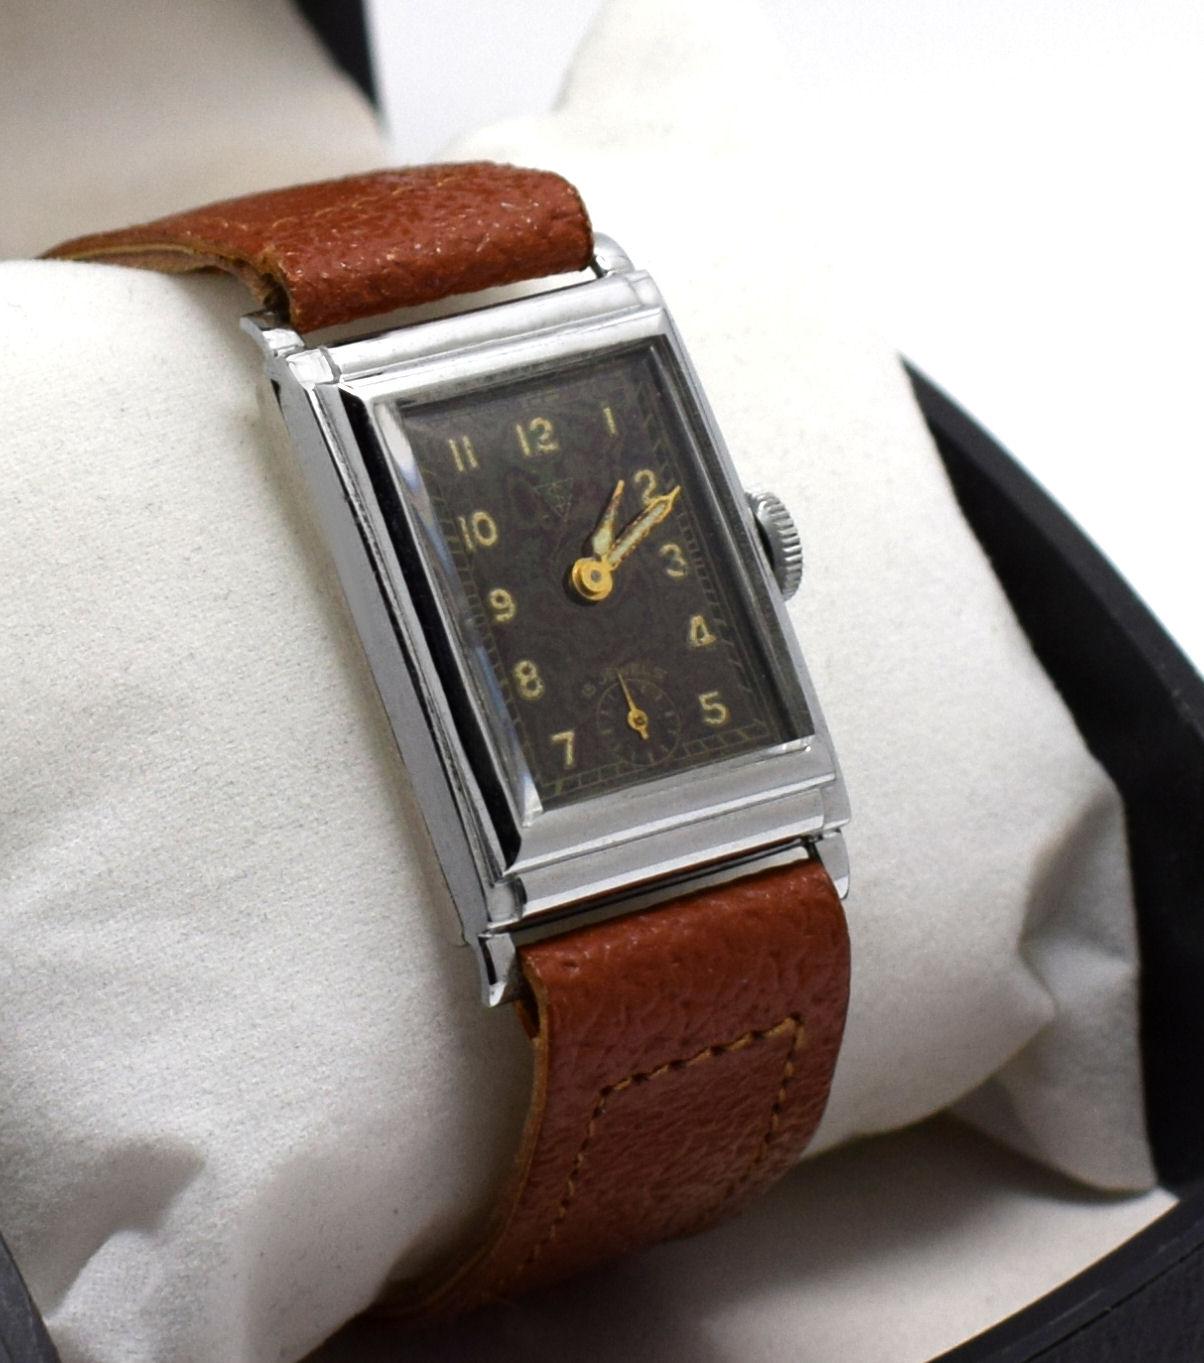 For your consideration is this very stylish Art Deco, 1930s men’s tank watch made in Germany. Beautiful condition throughout, the chrome is as good as you could hope for, with original old sales label still attached, this watch is old new stock and